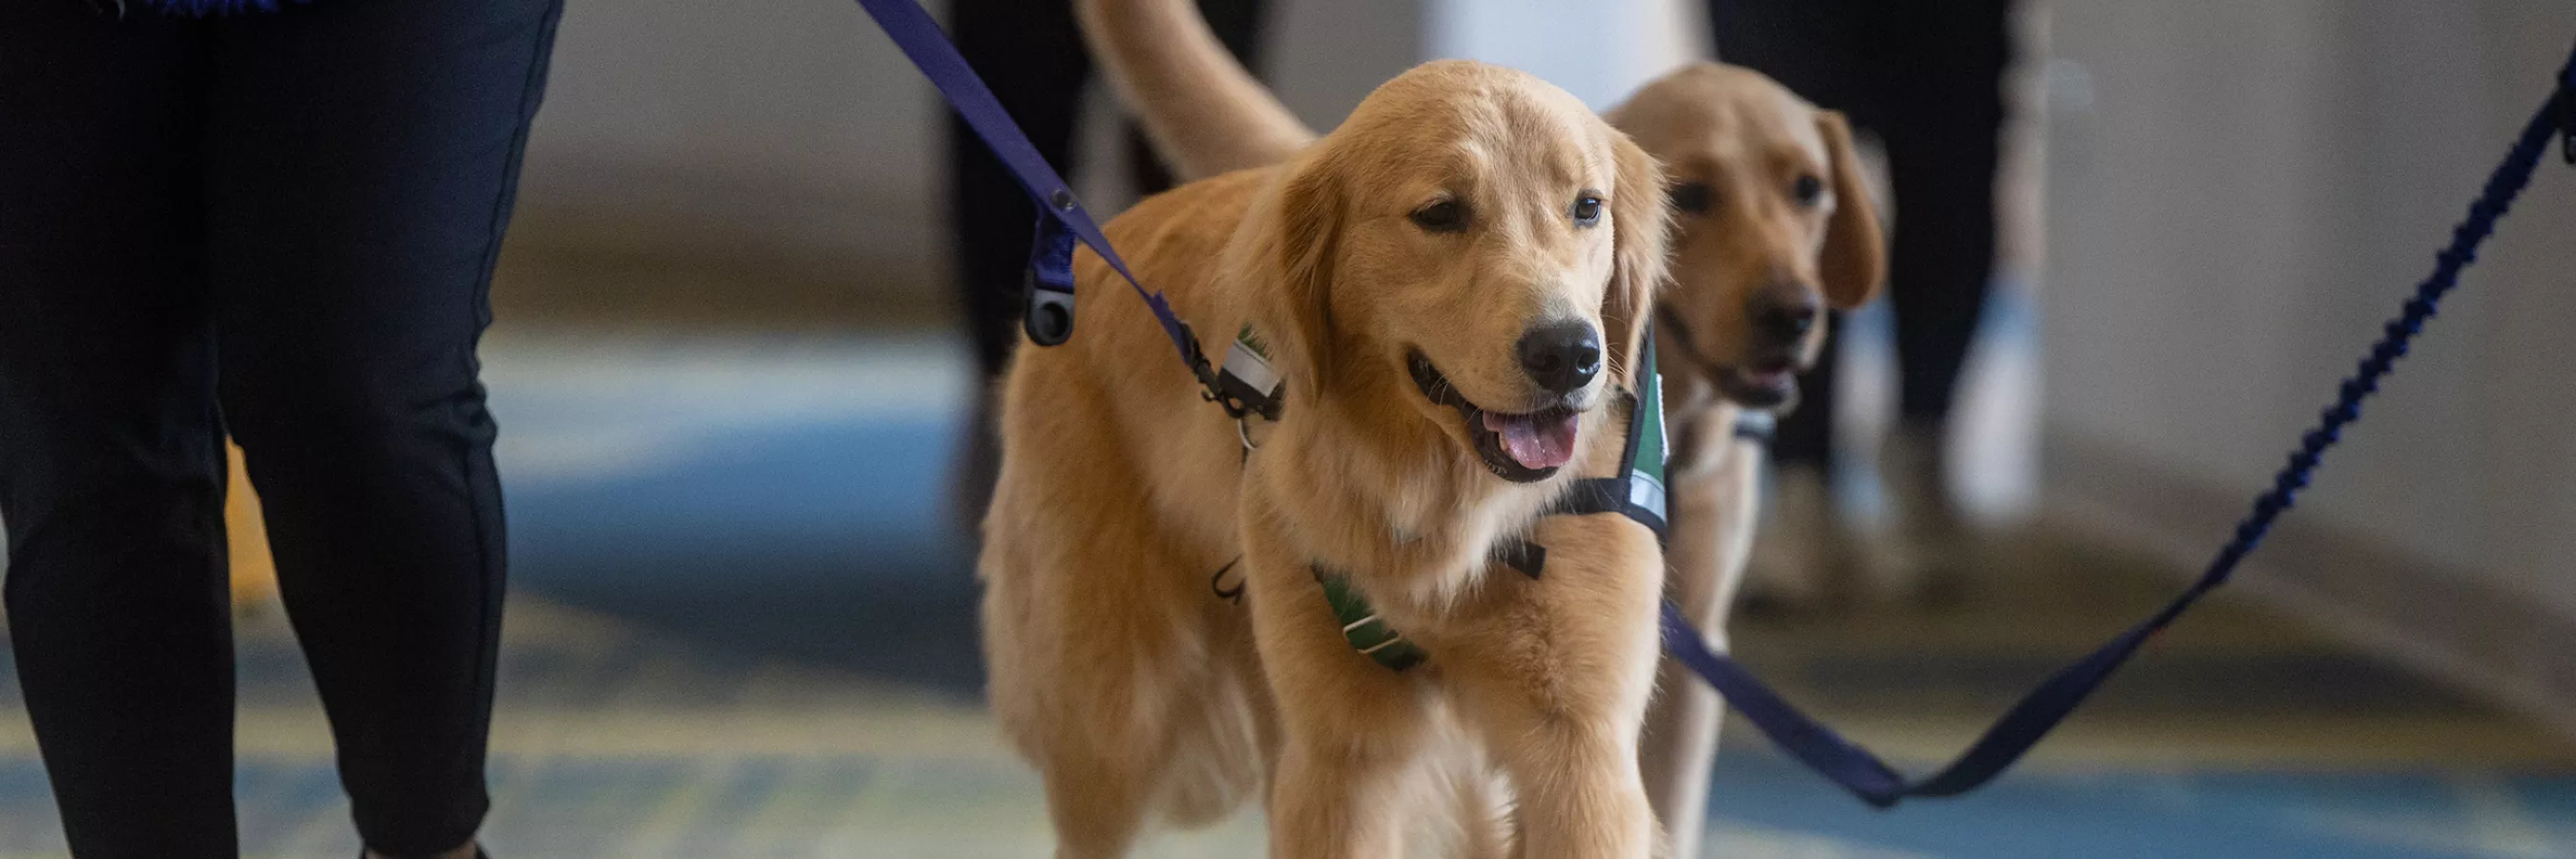 Giving back to the community: Therapy dogs offer companionship, love, and  healing.